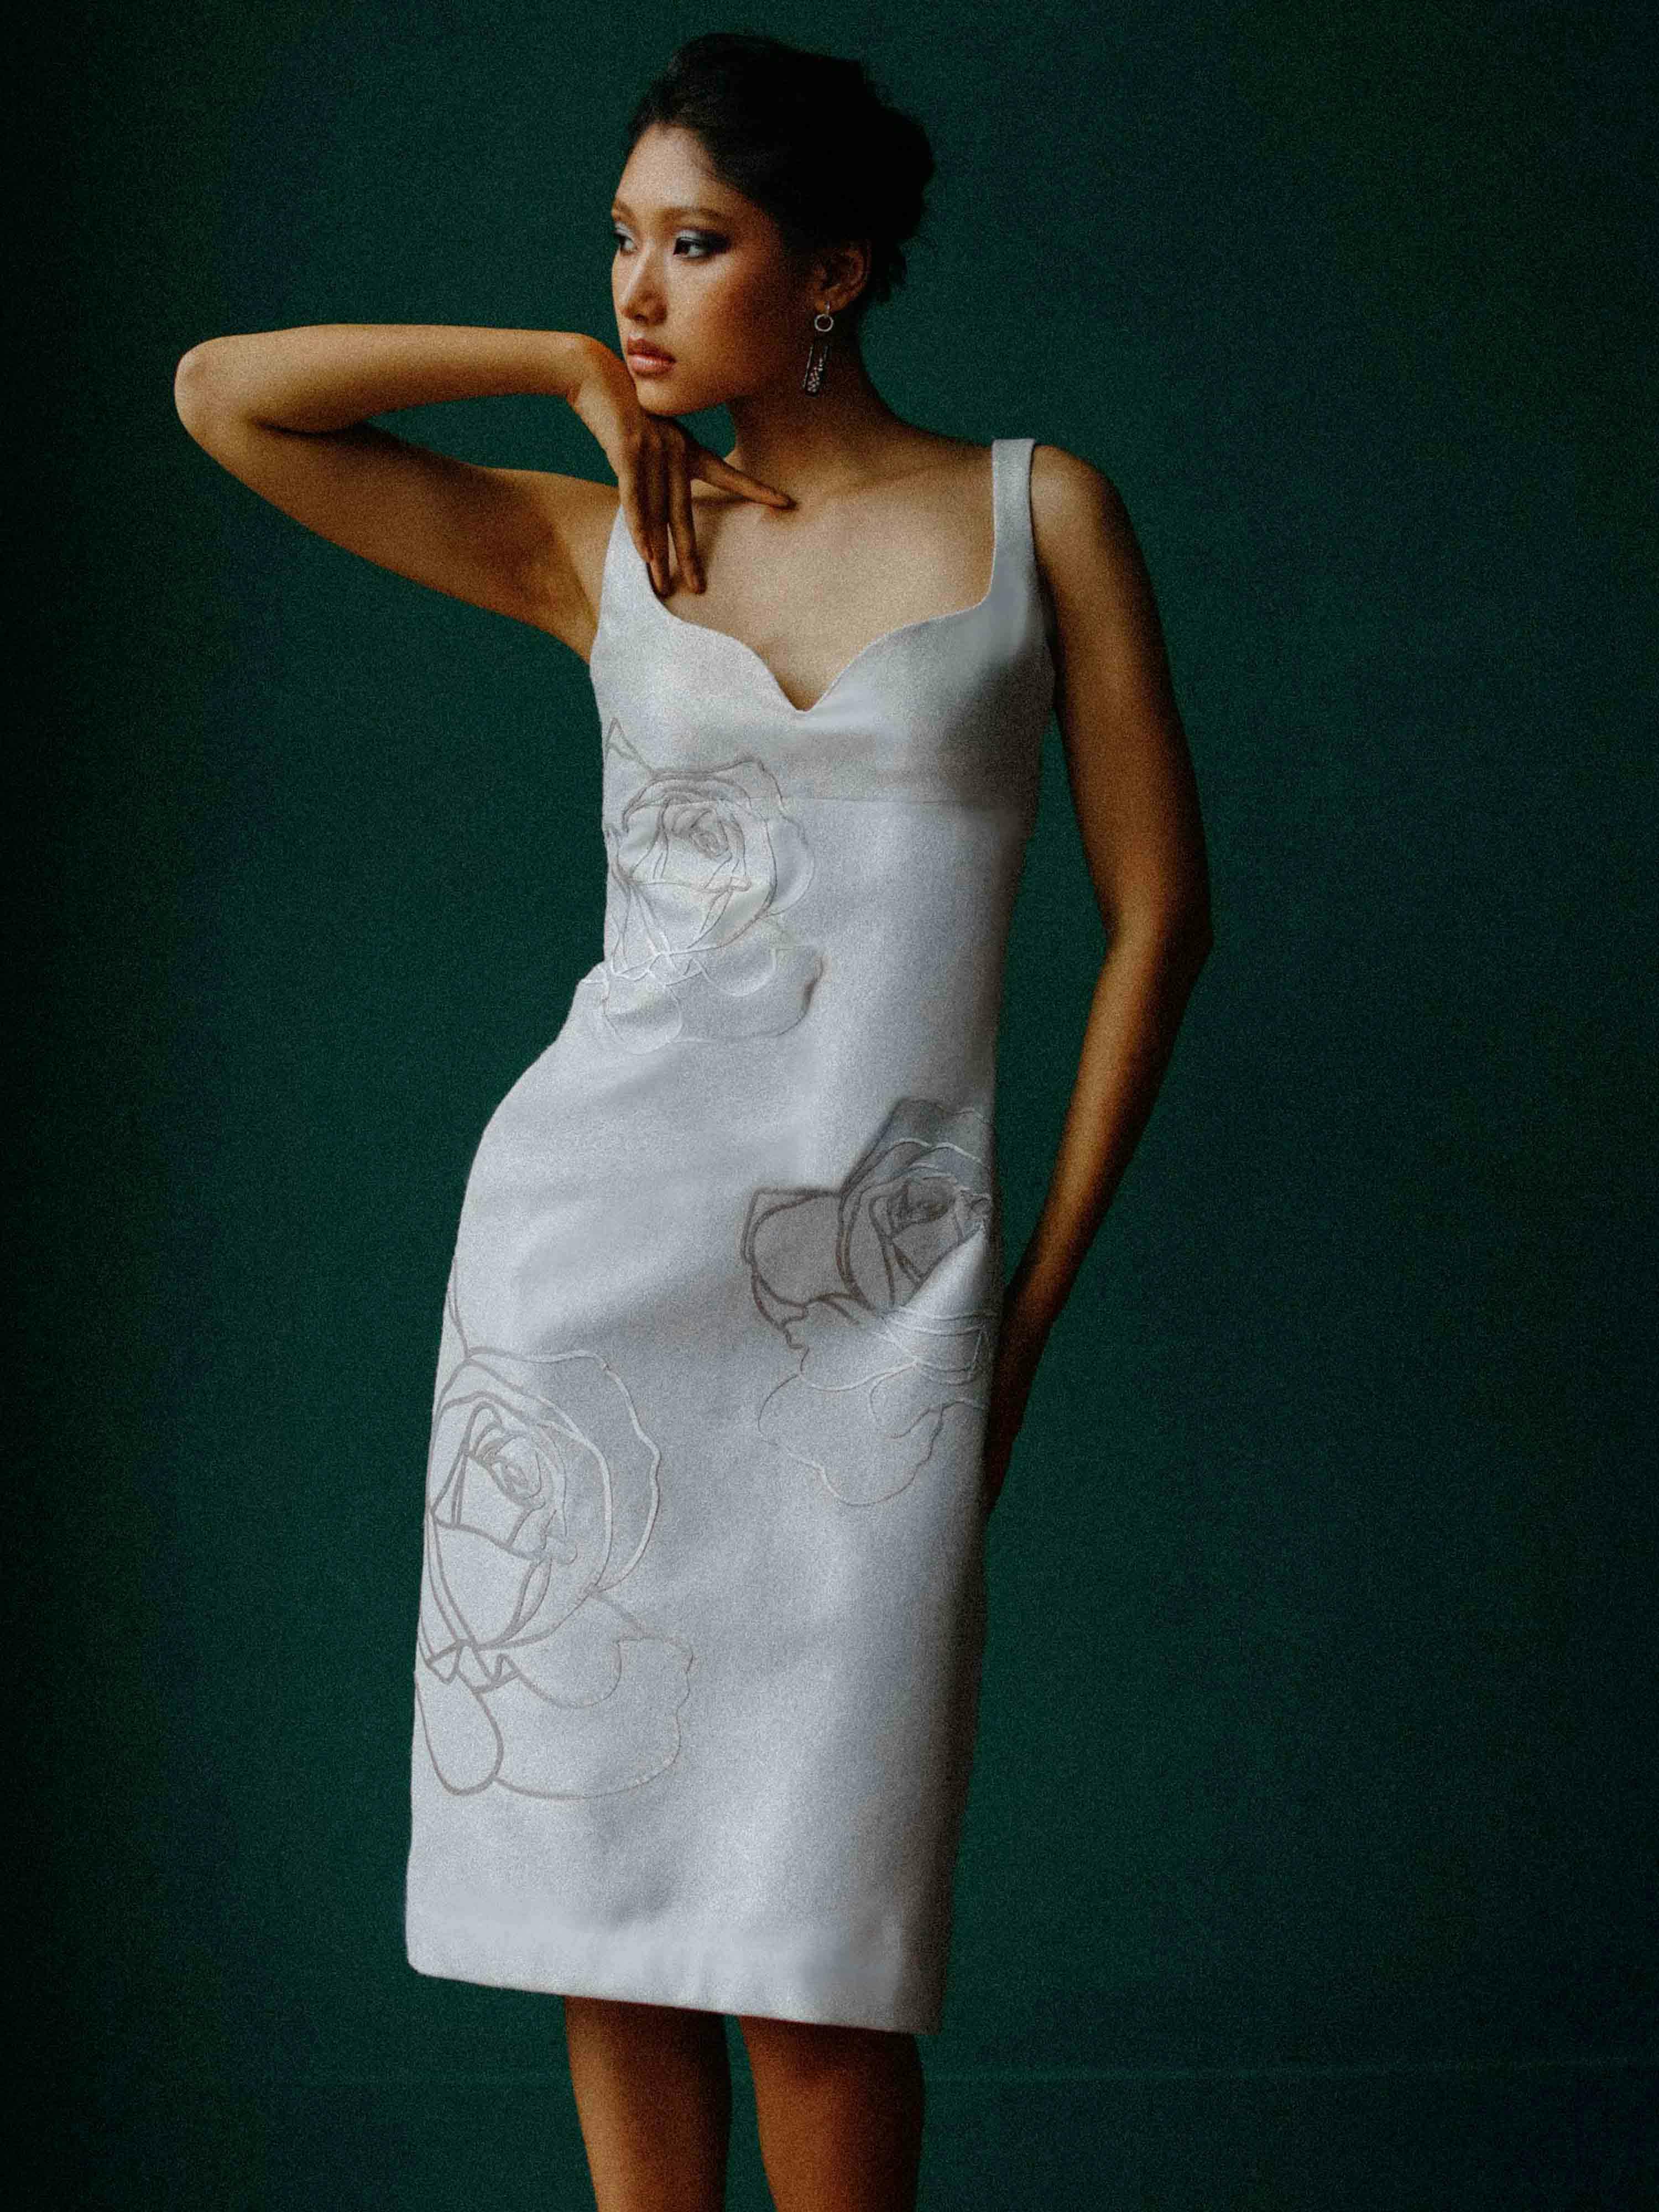 Sweet heart necklined dress with embossed metallic roses, a product by Shriya Khanna